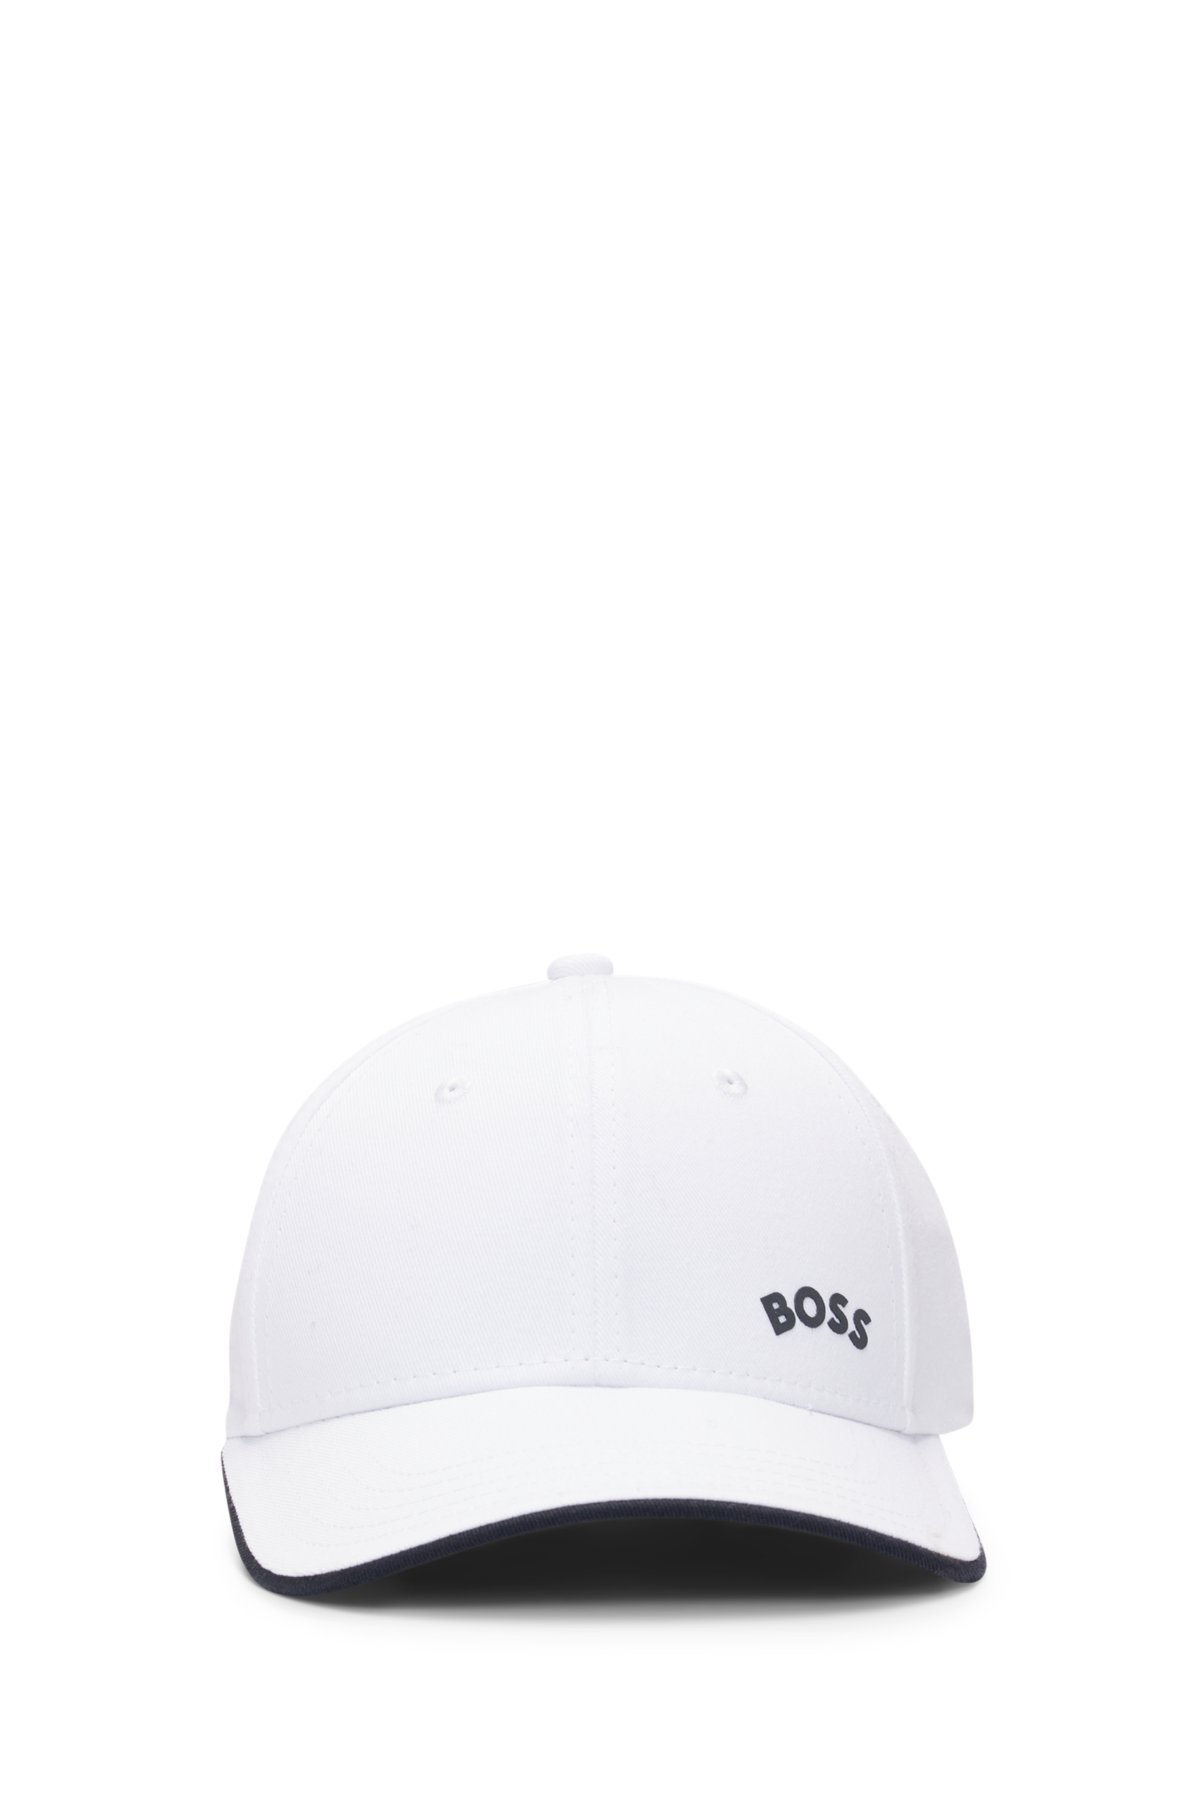 - cap curved with BOSS Cotton-twill logo